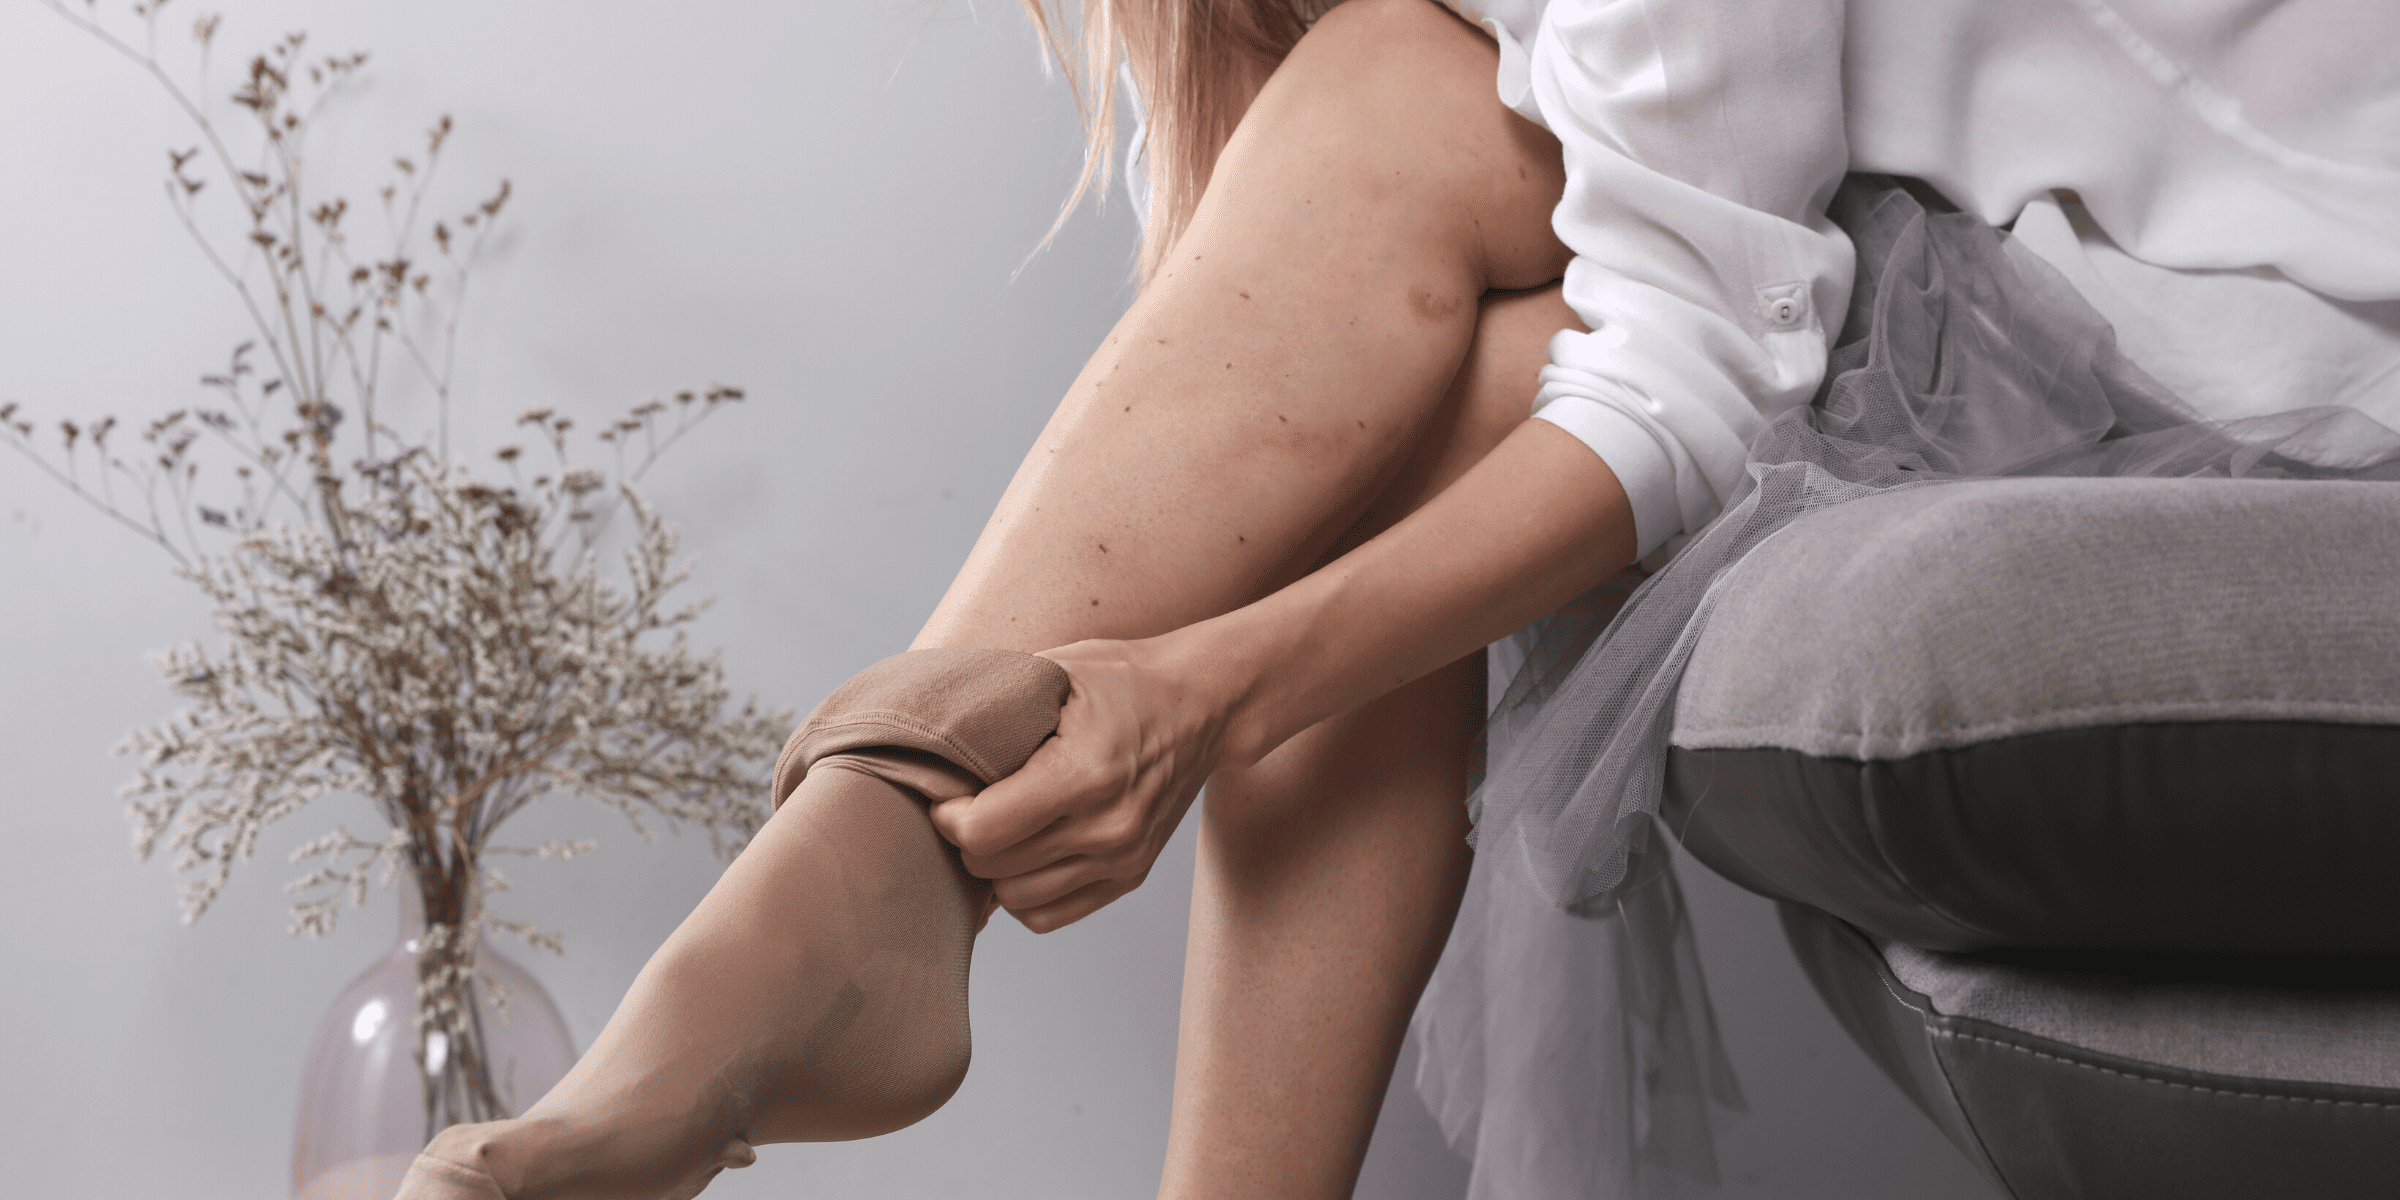 young woman with blond hair putting on compression stocking over leg with bruises